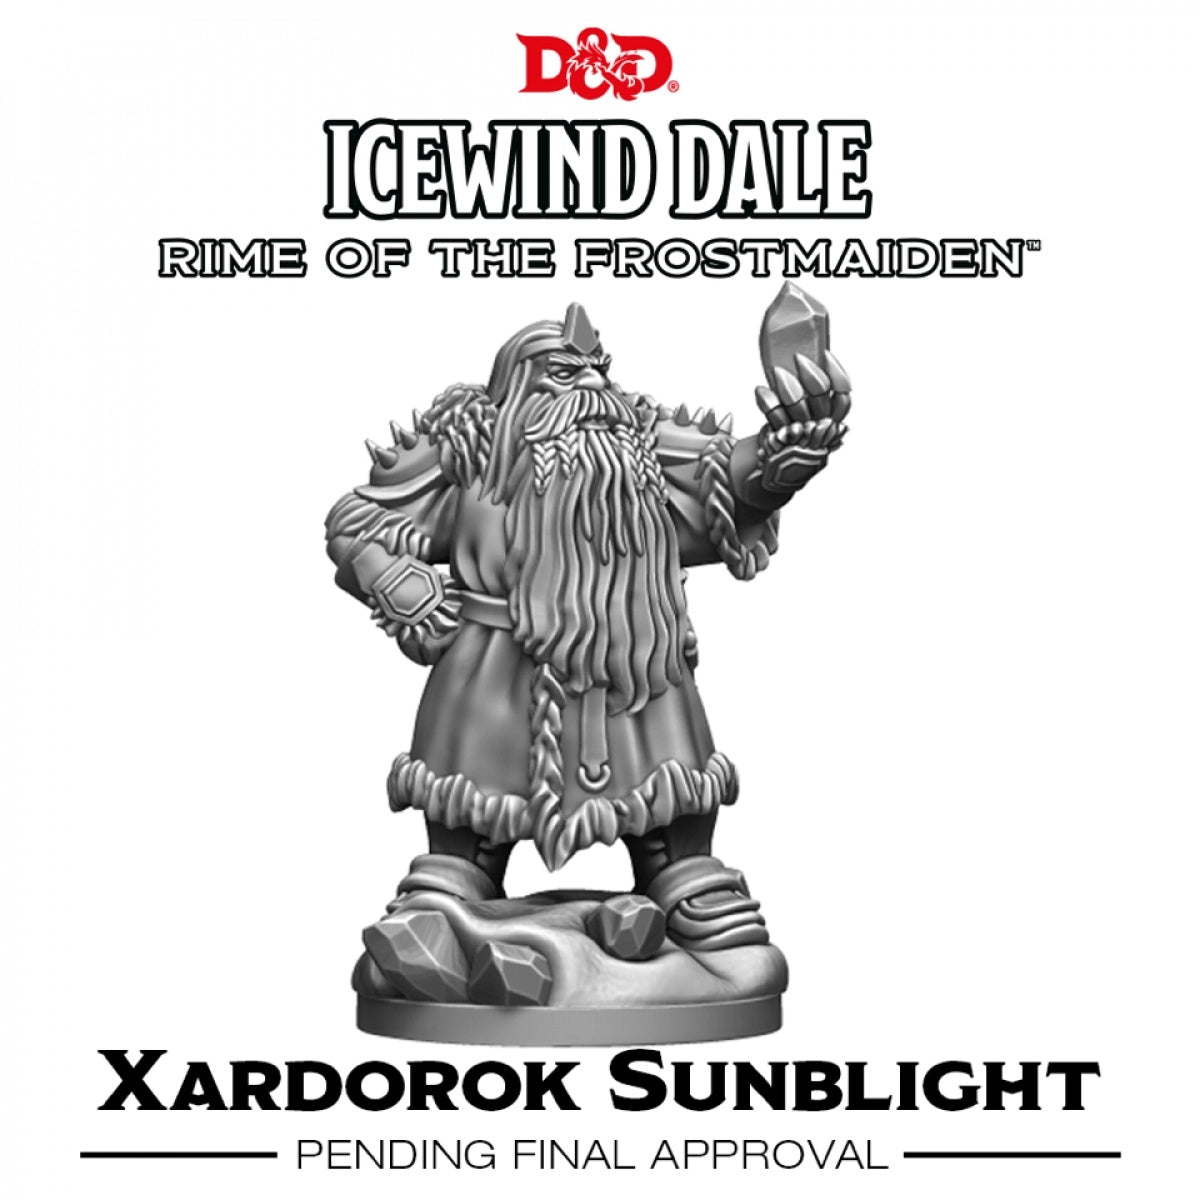 Dungeons &amp; Dragons - Icewind Dale Rime of the Frostmaiden Xardorok Sunblight